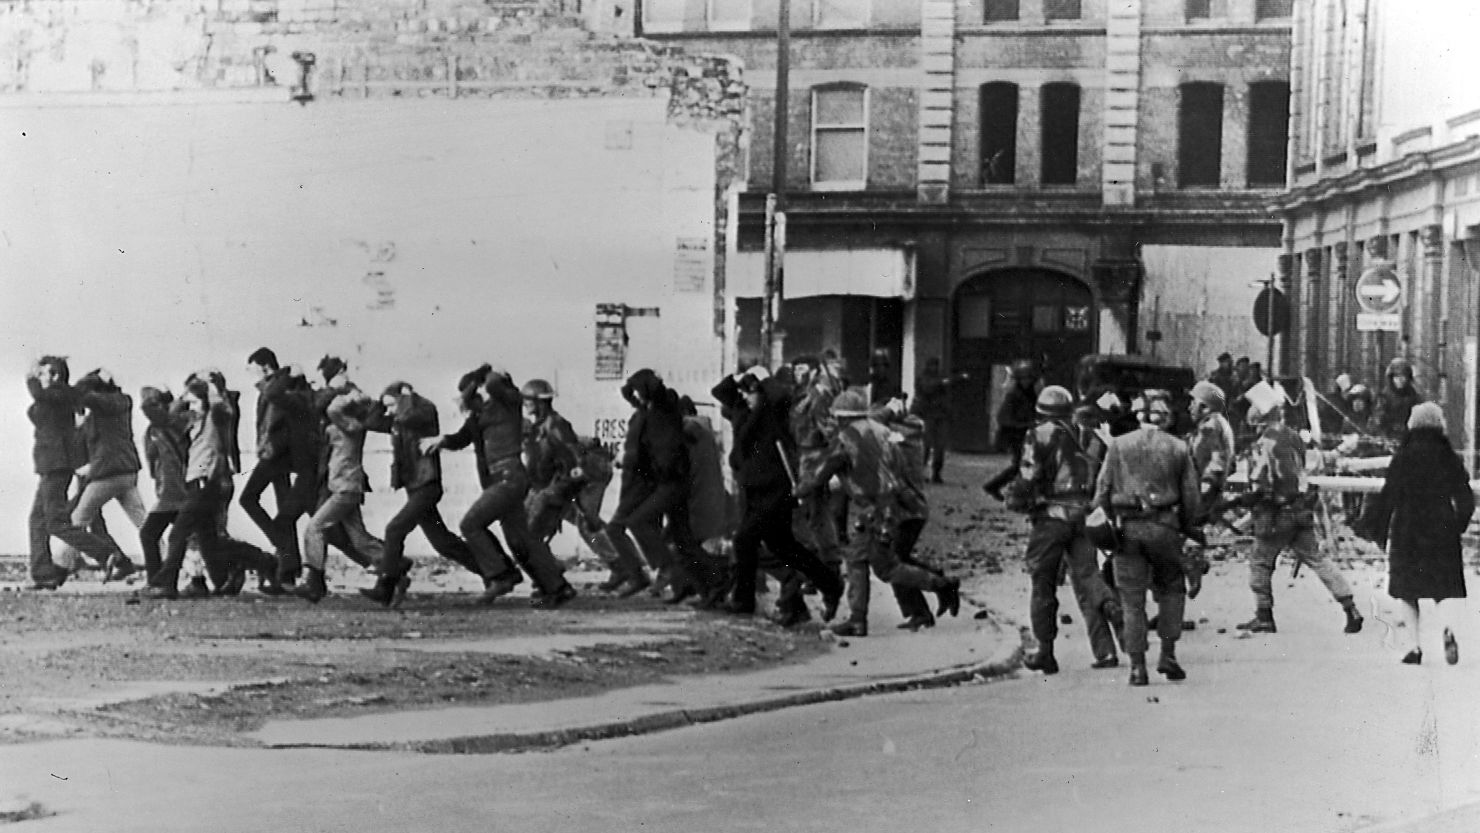 British paratroopers take away civil rights demonstrators on 'Bloody Sunday' in 1972.